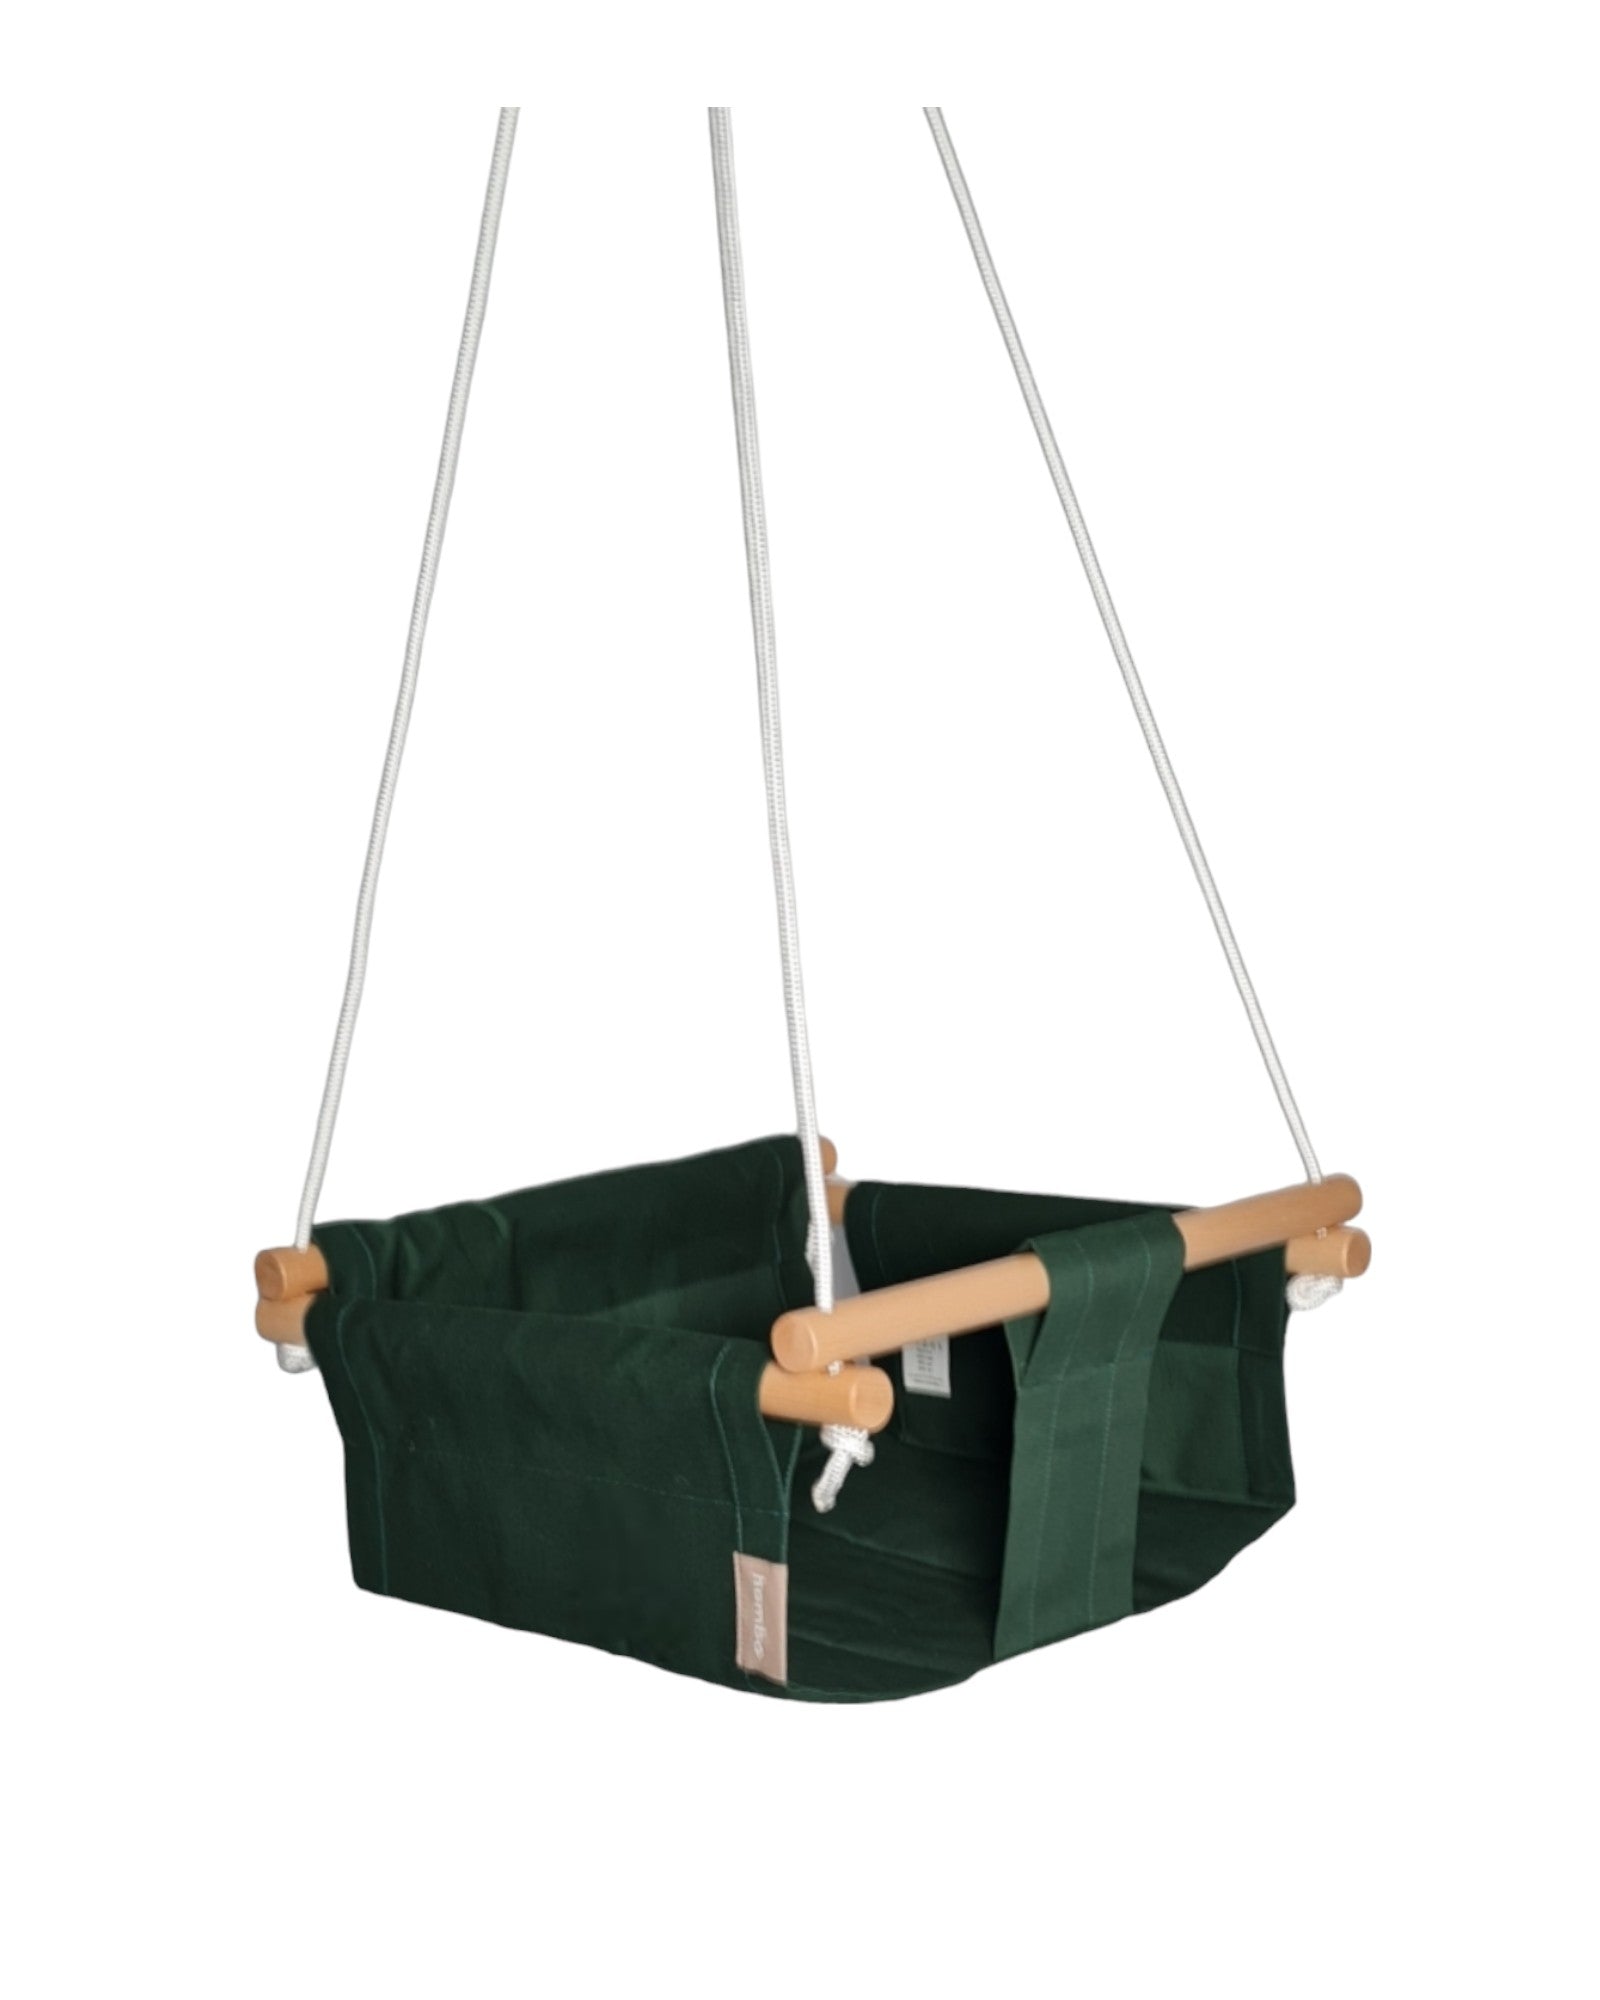 homba® kids cotton swing green (from 6 months)